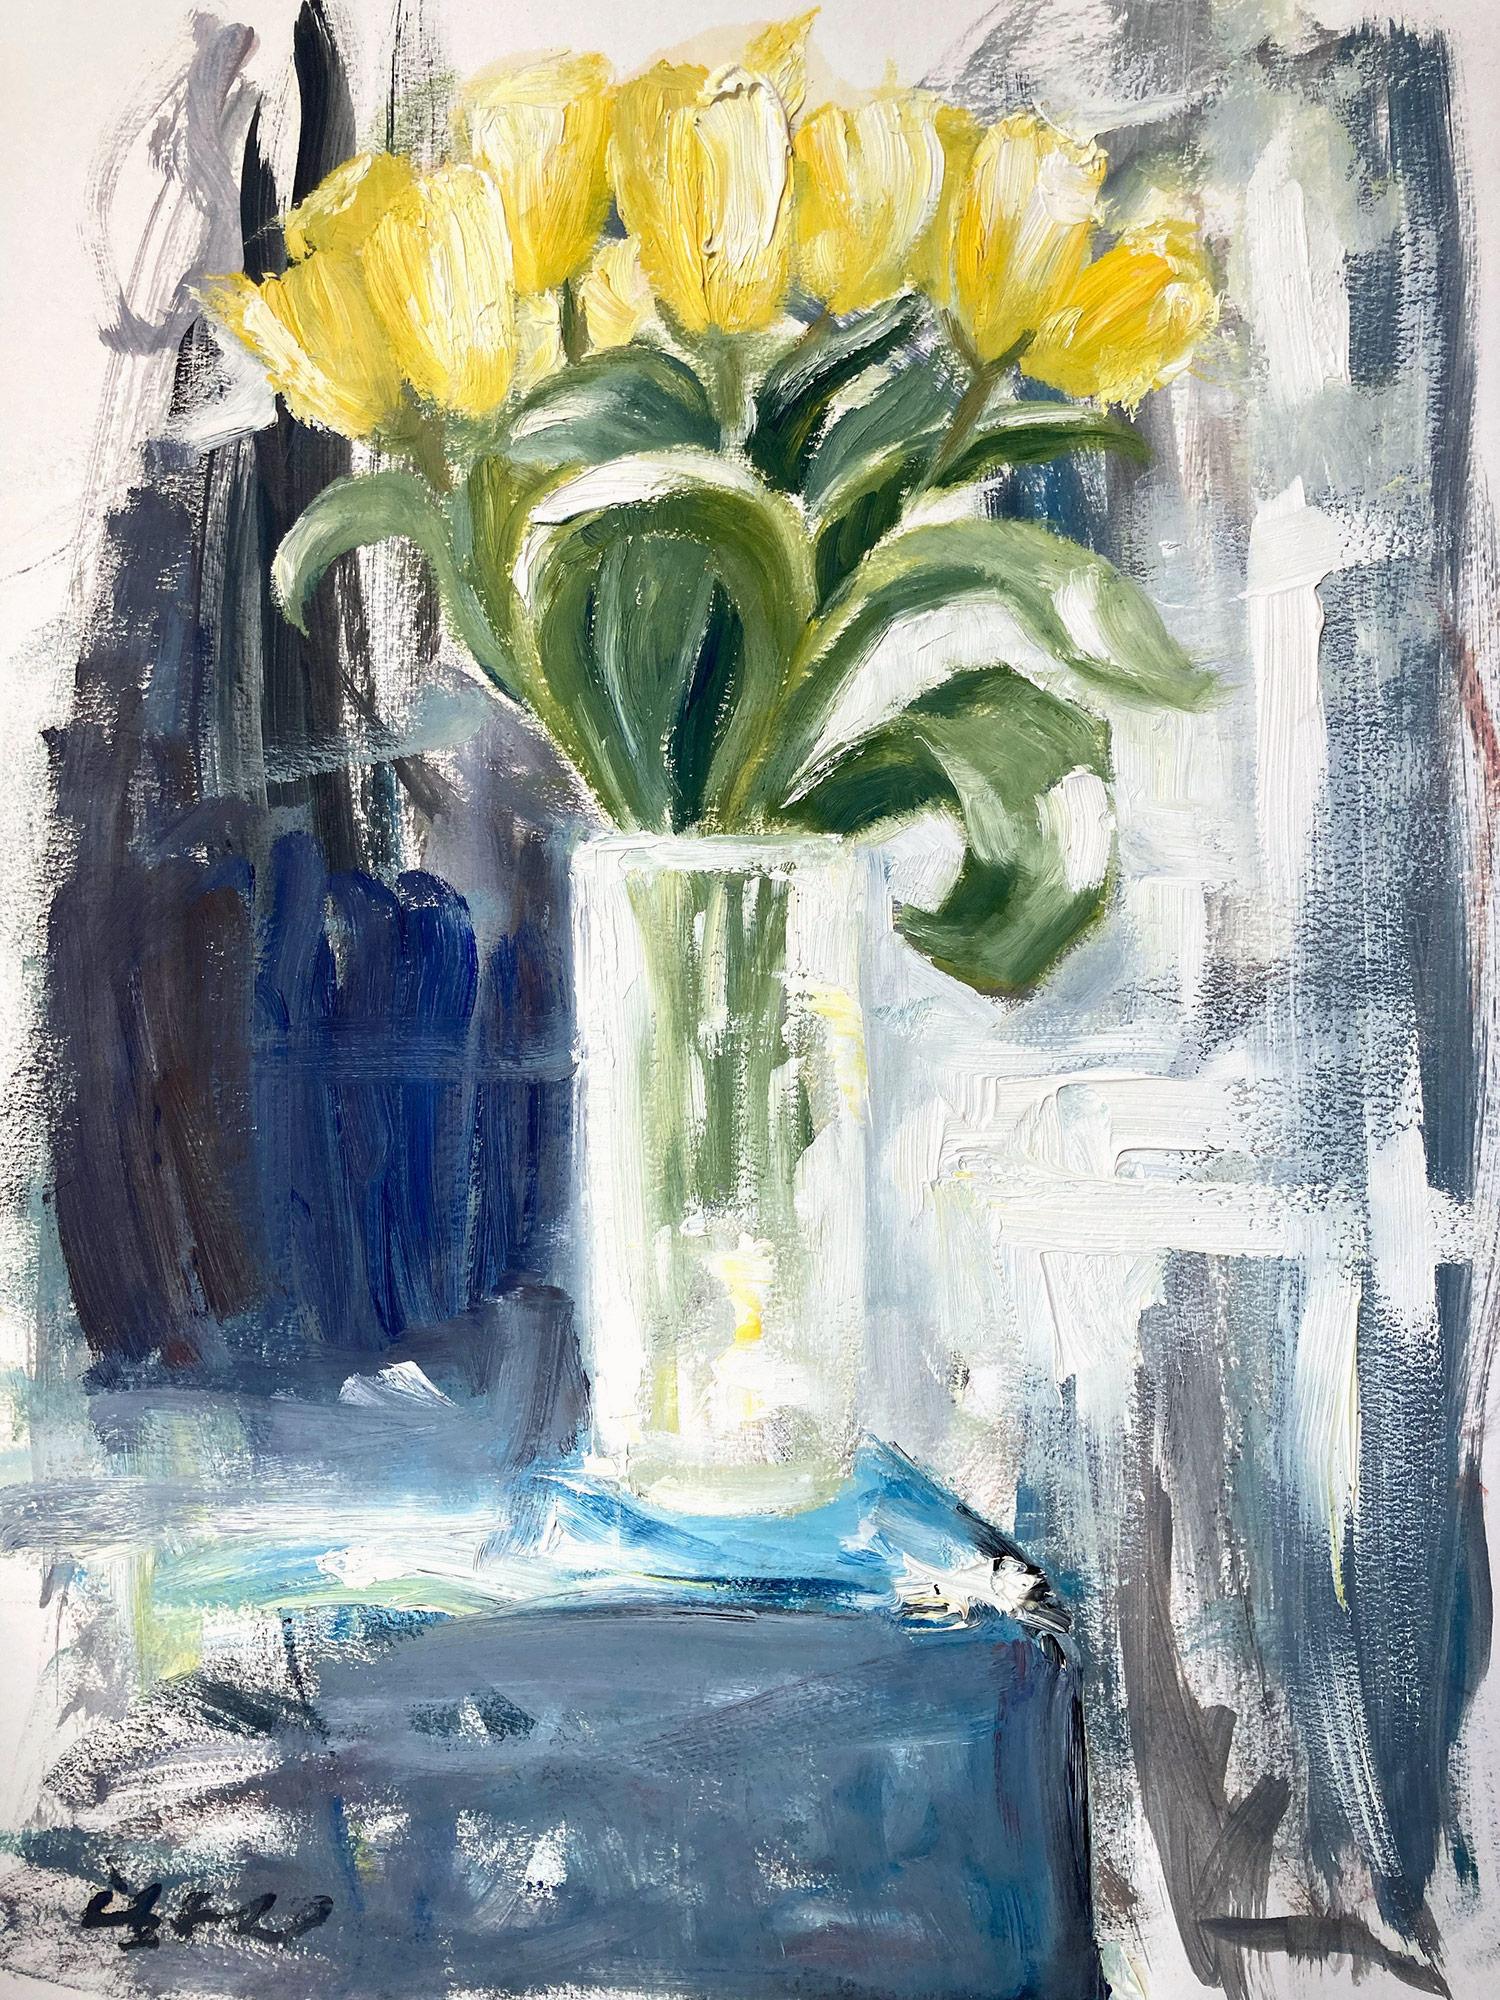 Cindy Shaoul Abstract Painting - "Morning Yellow Tulips" Impressionistic Colorful Contemporary Oil Painting Paper